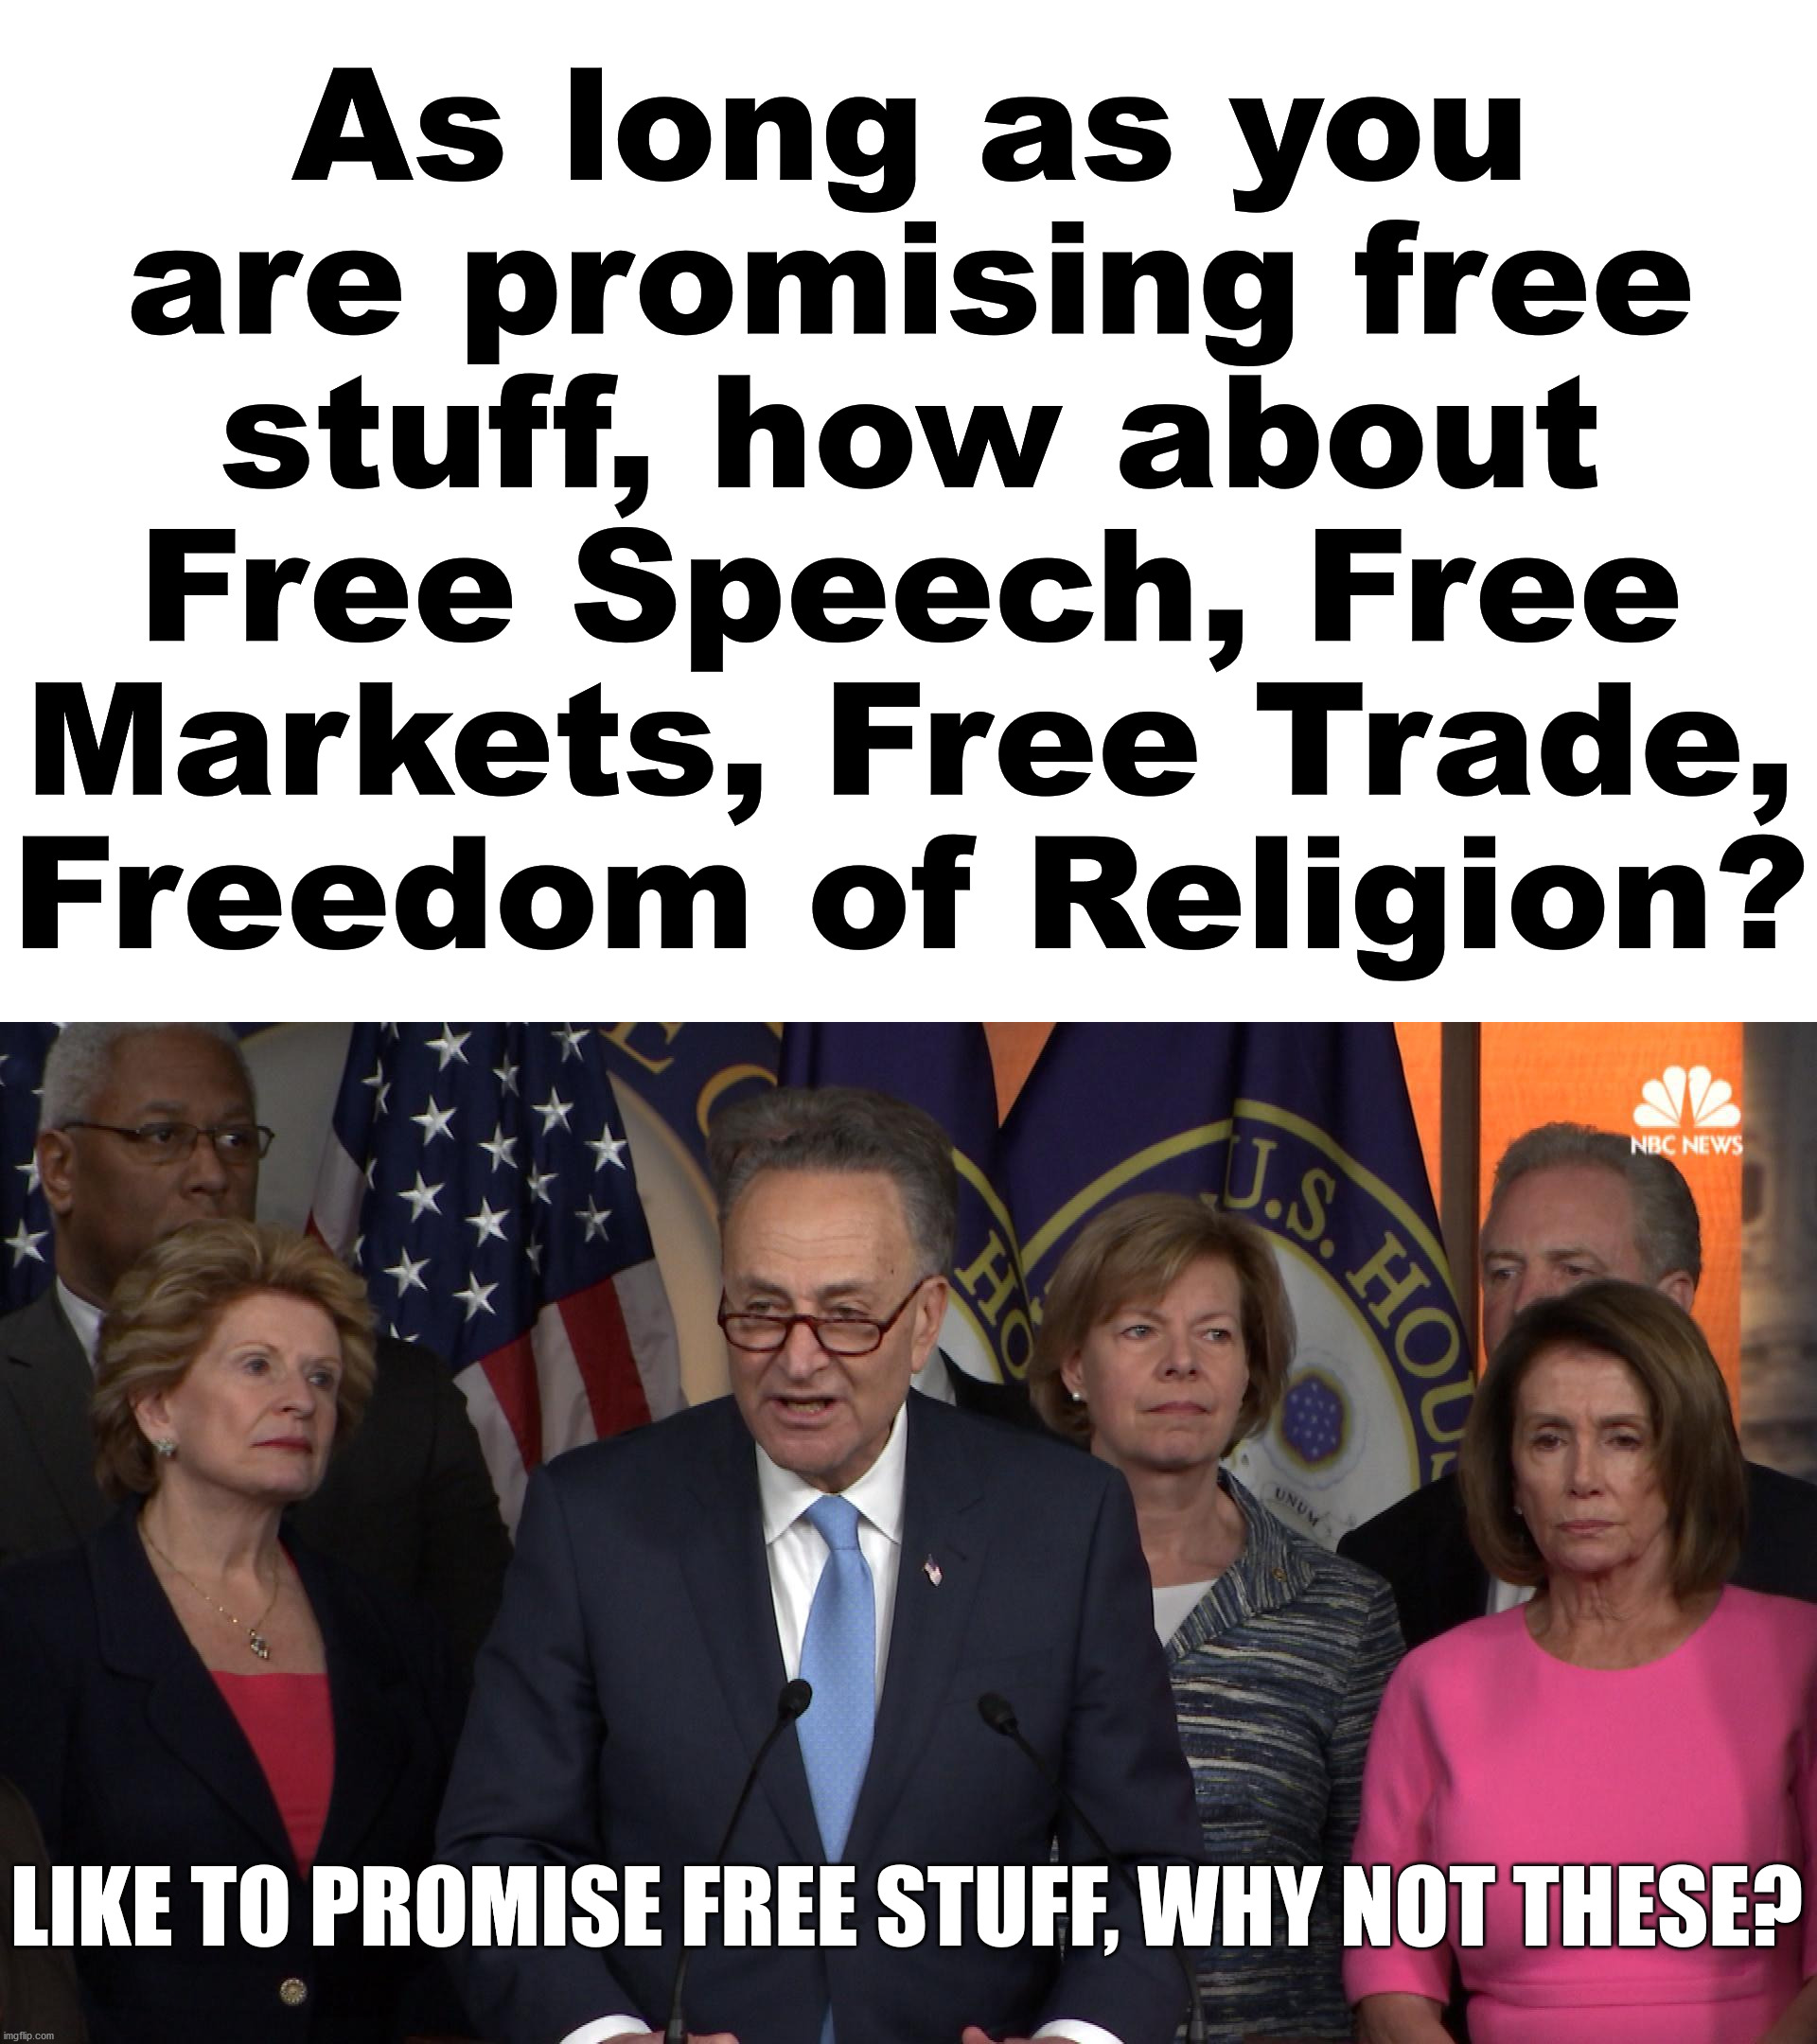 Just give me freedom to run my own life. | As long as you are promising free stuff, how about Free Speech, Free Markets, Free Trade, Freedom of Religion? LIKE TO PROMISE FREE STUFF, WHY NOT THESE? | image tagged in democrat congressmen,freedom,political meme | made w/ Imgflip meme maker